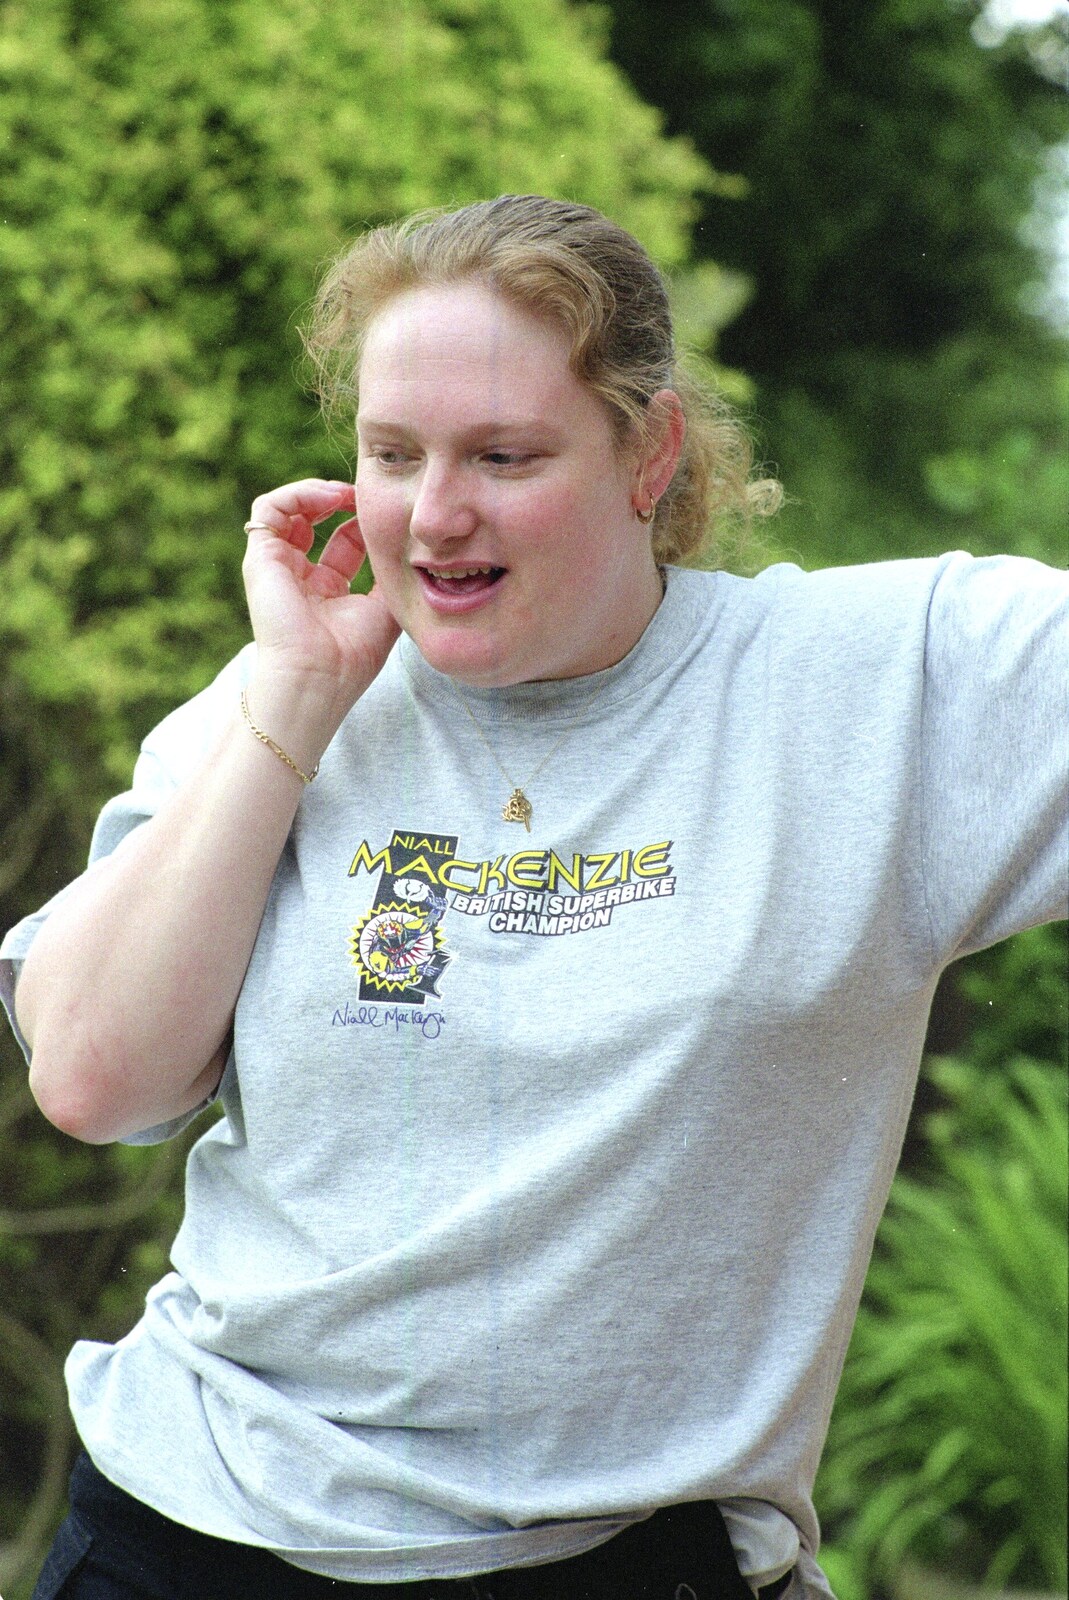 Sally from Colin and Jill's Barbeque, Suffolk - 28th May 2000